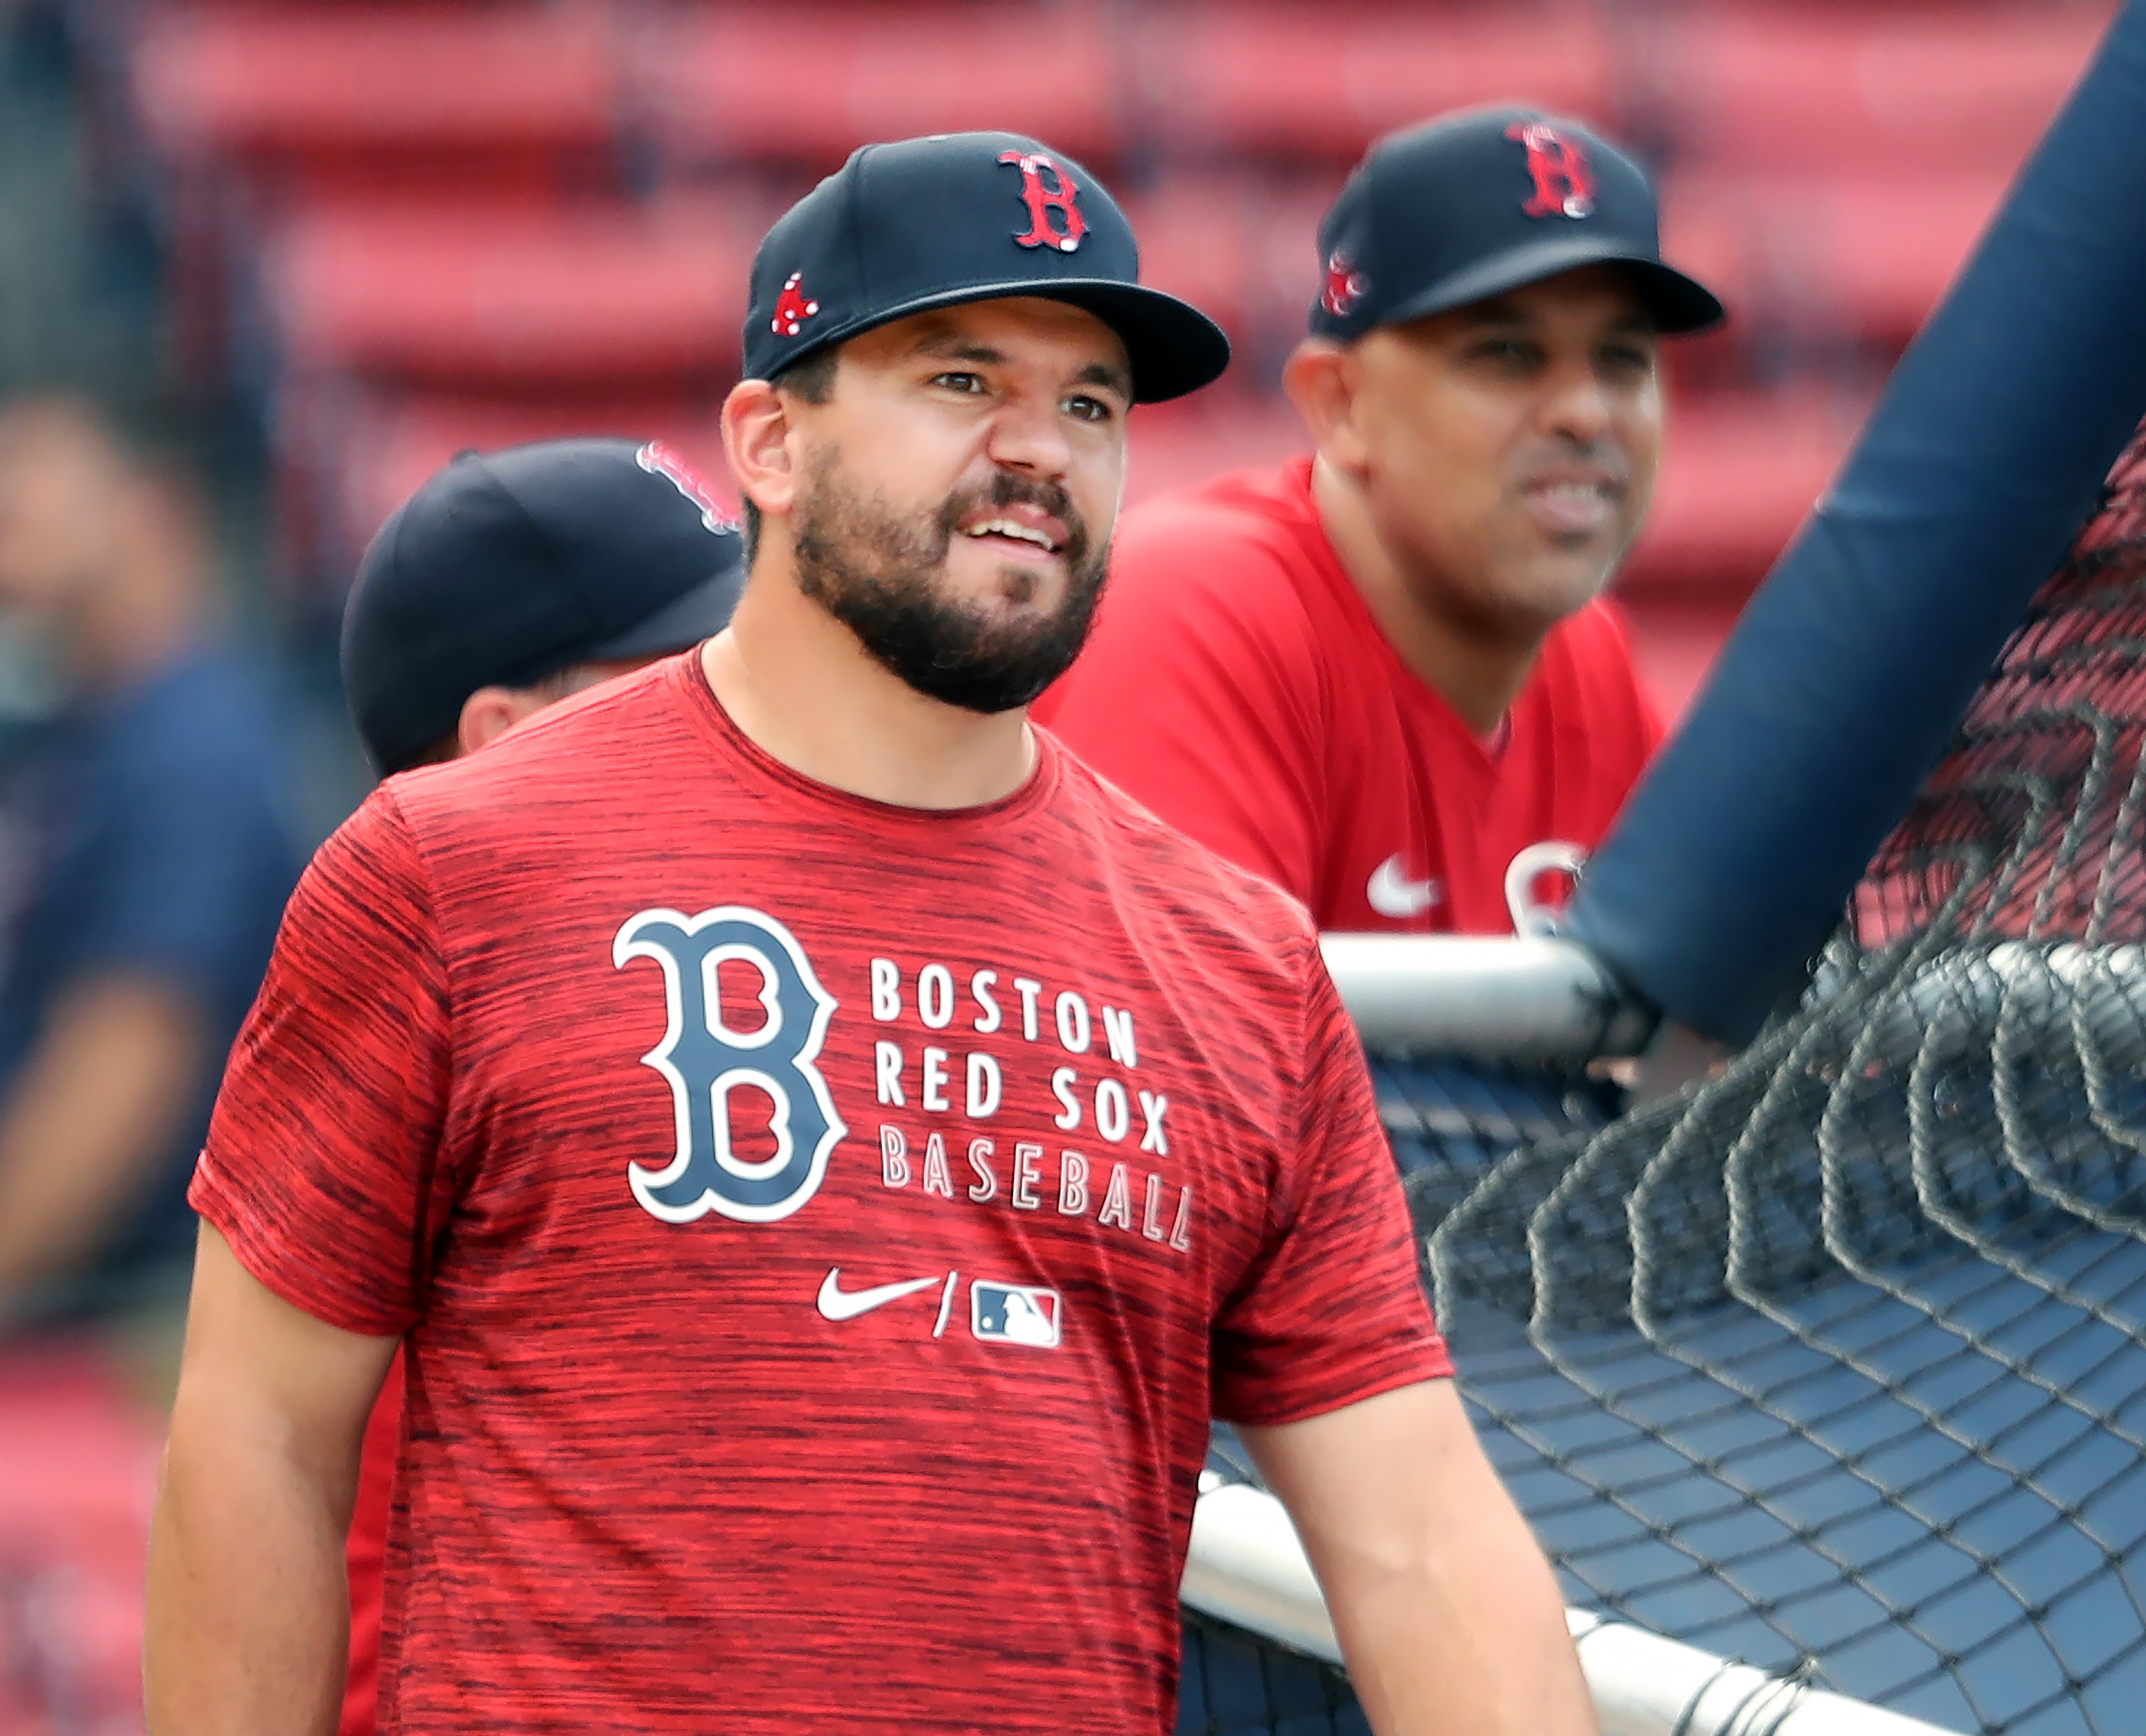 Kyle Schwarber will not return to Red Sox, signs deal with